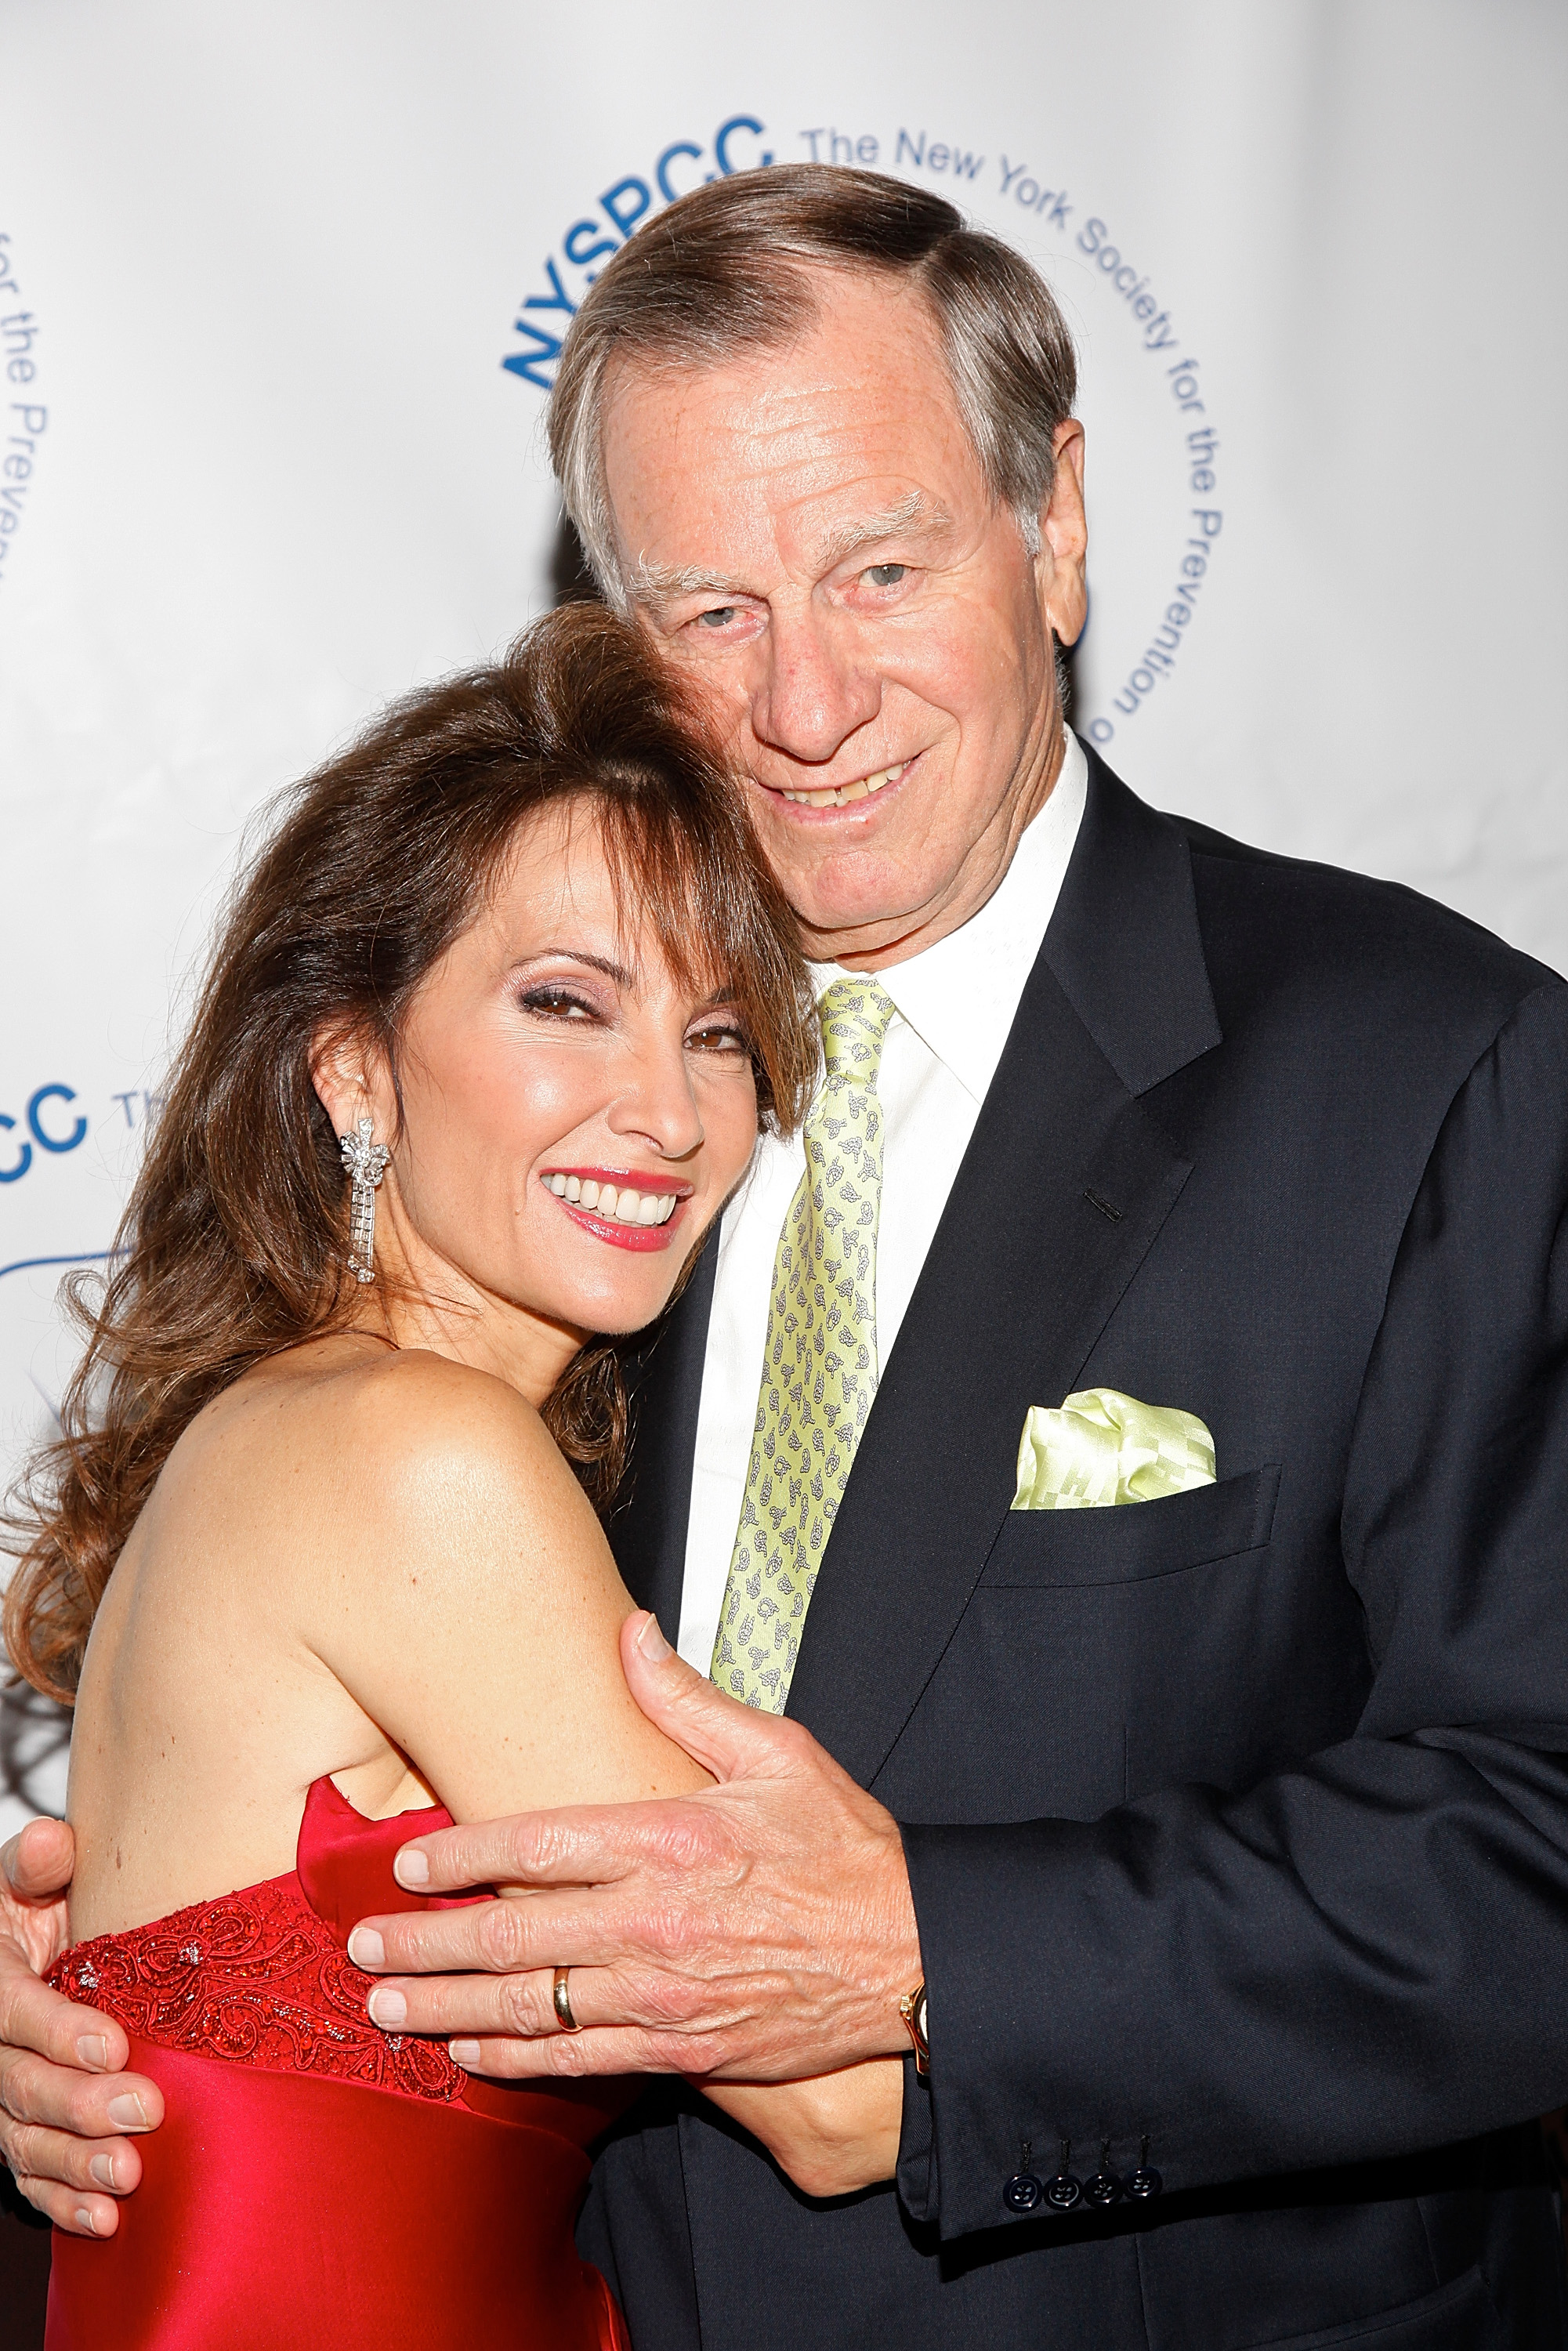 Susan Lucci and Helmut Huber attend the 2009 Child Protection Agency's Gala in New York City, on October 26, 2009. | Source: Getty Images